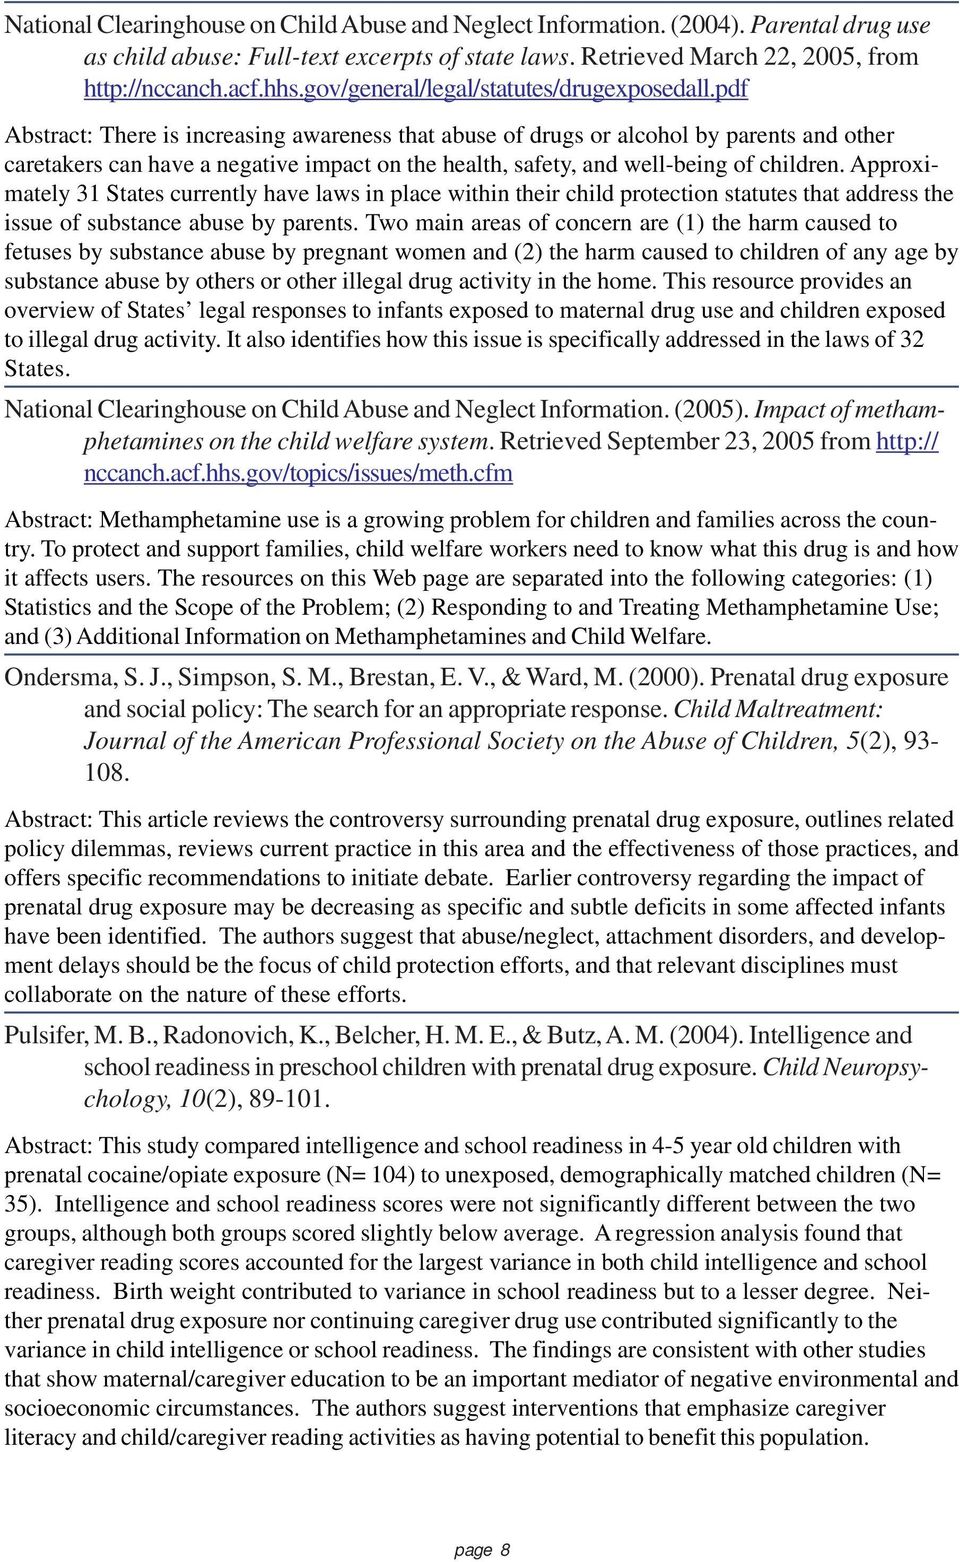 pdf Abstract: There is increasing awareness that abuse of drugs or alcohol by parents and other caretakers can have a negative impact on the health, safety, and well-being of children.